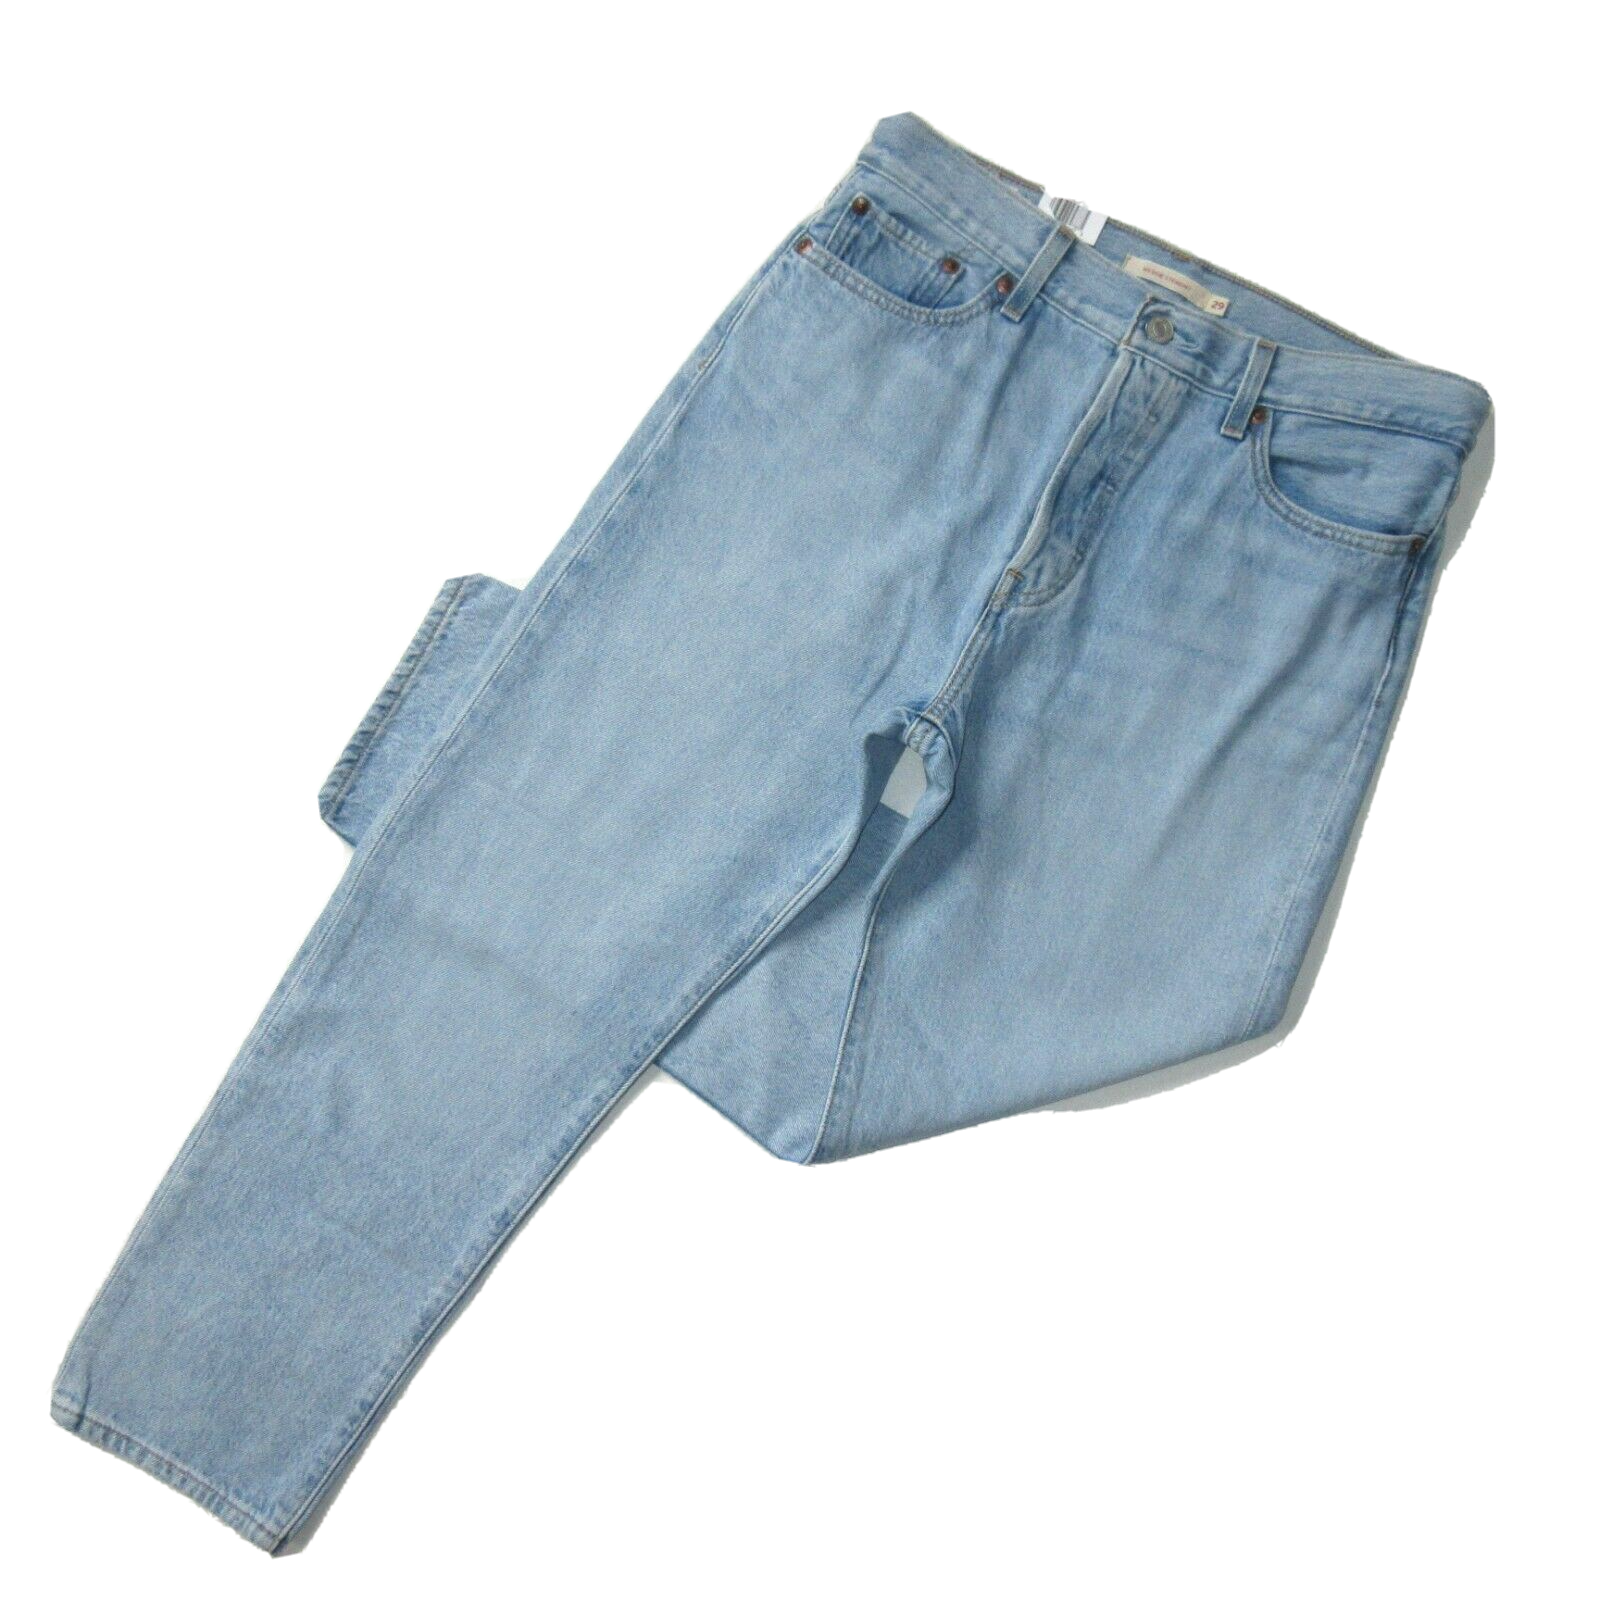 NWT Levi's Wedgie Straight in Montgomery Baked High Rise Crop Jeans 29 $98  193238958875 | eBay